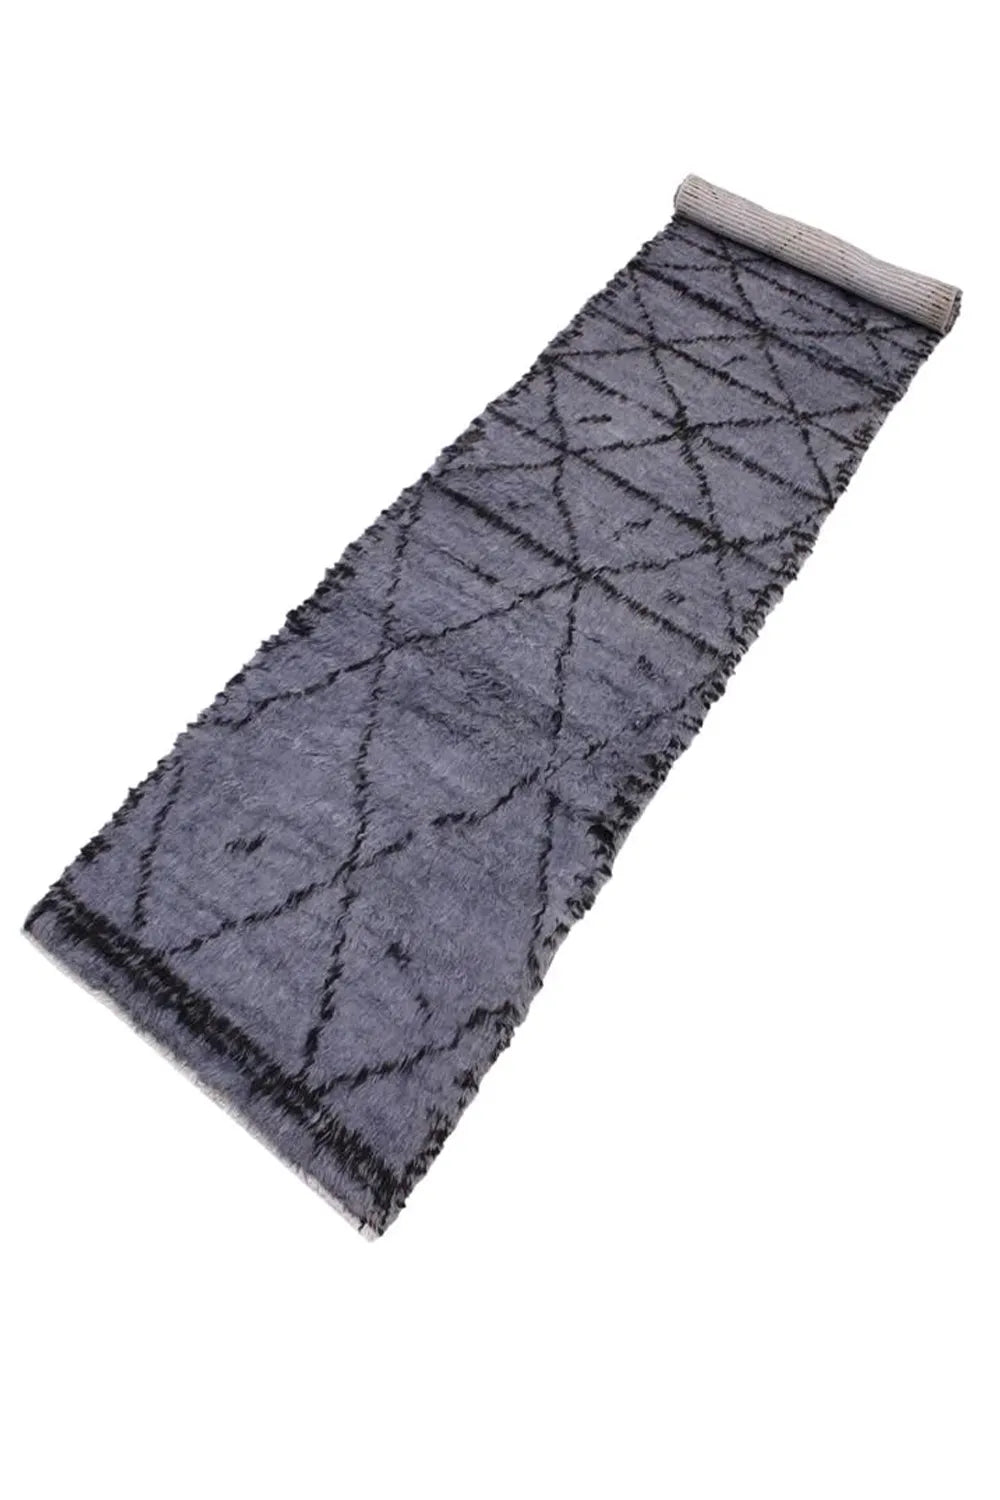 Plush gray runner rug designed to bring comfort and style to your hallway.